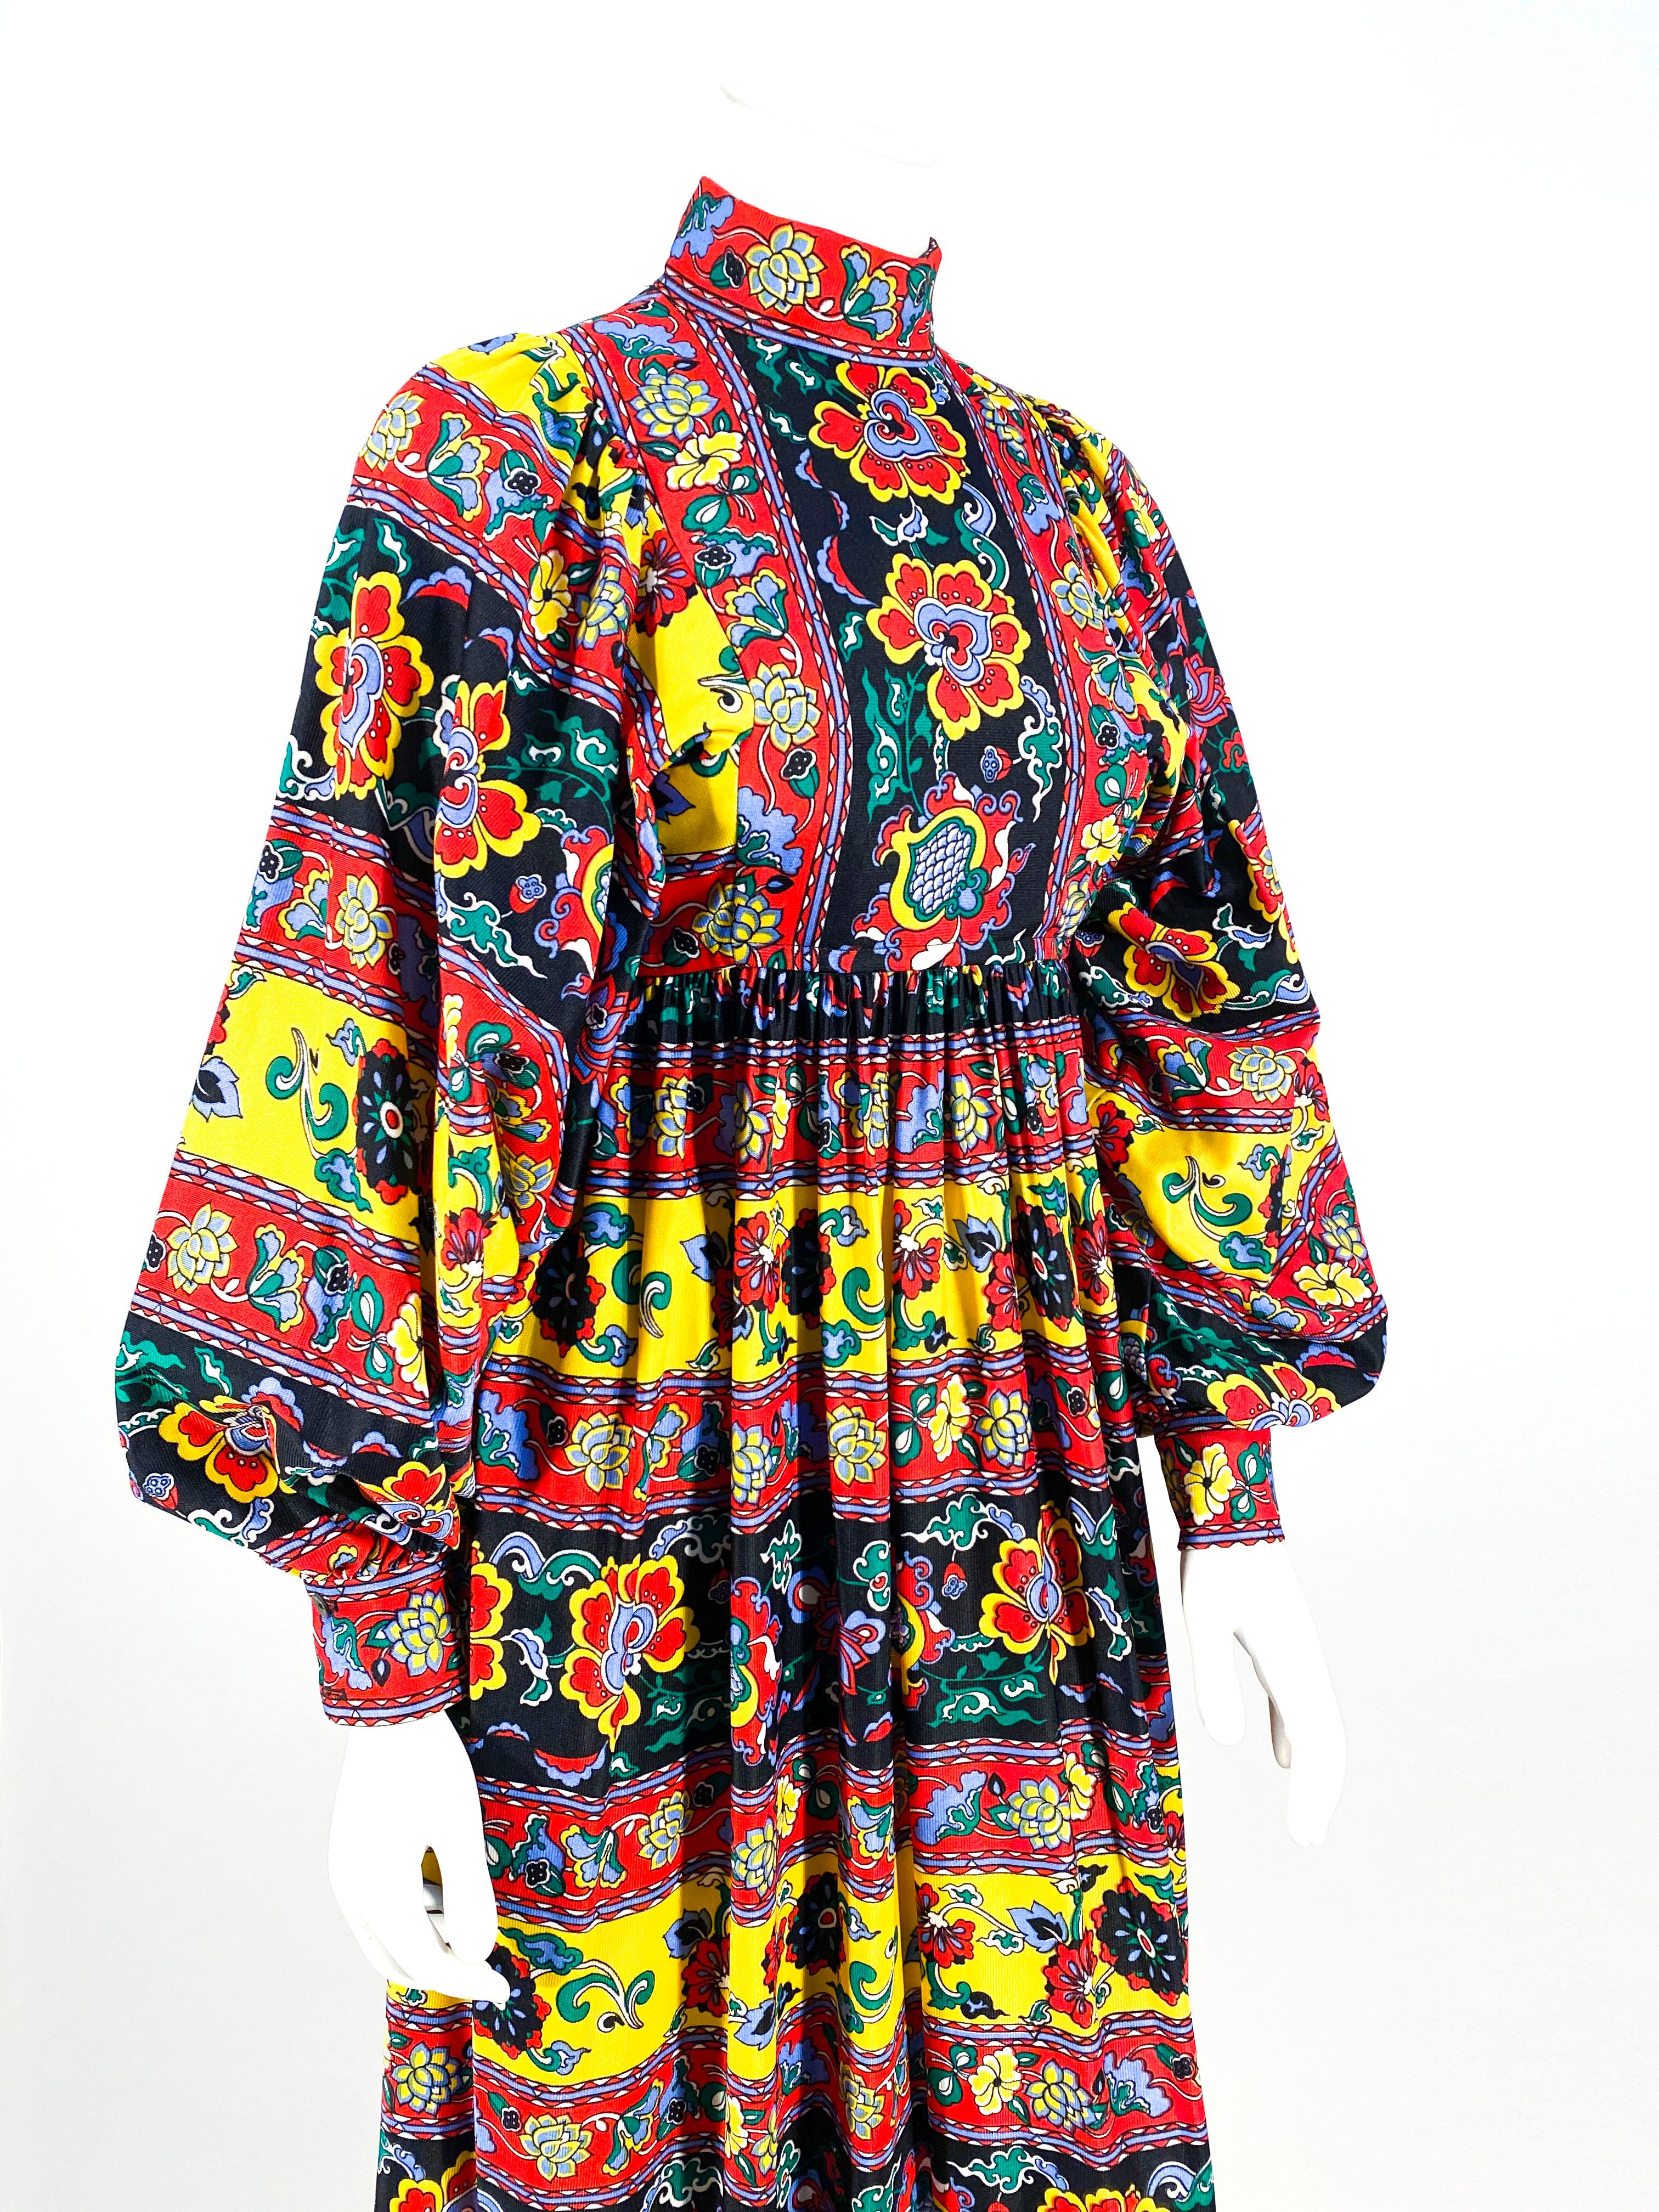 1970s stripped paisley printed knit polyester jersey peasant dress in jewel-tones of, navy, red, yellow, green, red, and blues. The silhouette of the dress features a full length skirt, a high-neck collar, and enlarged full cuffed sleeves. The back